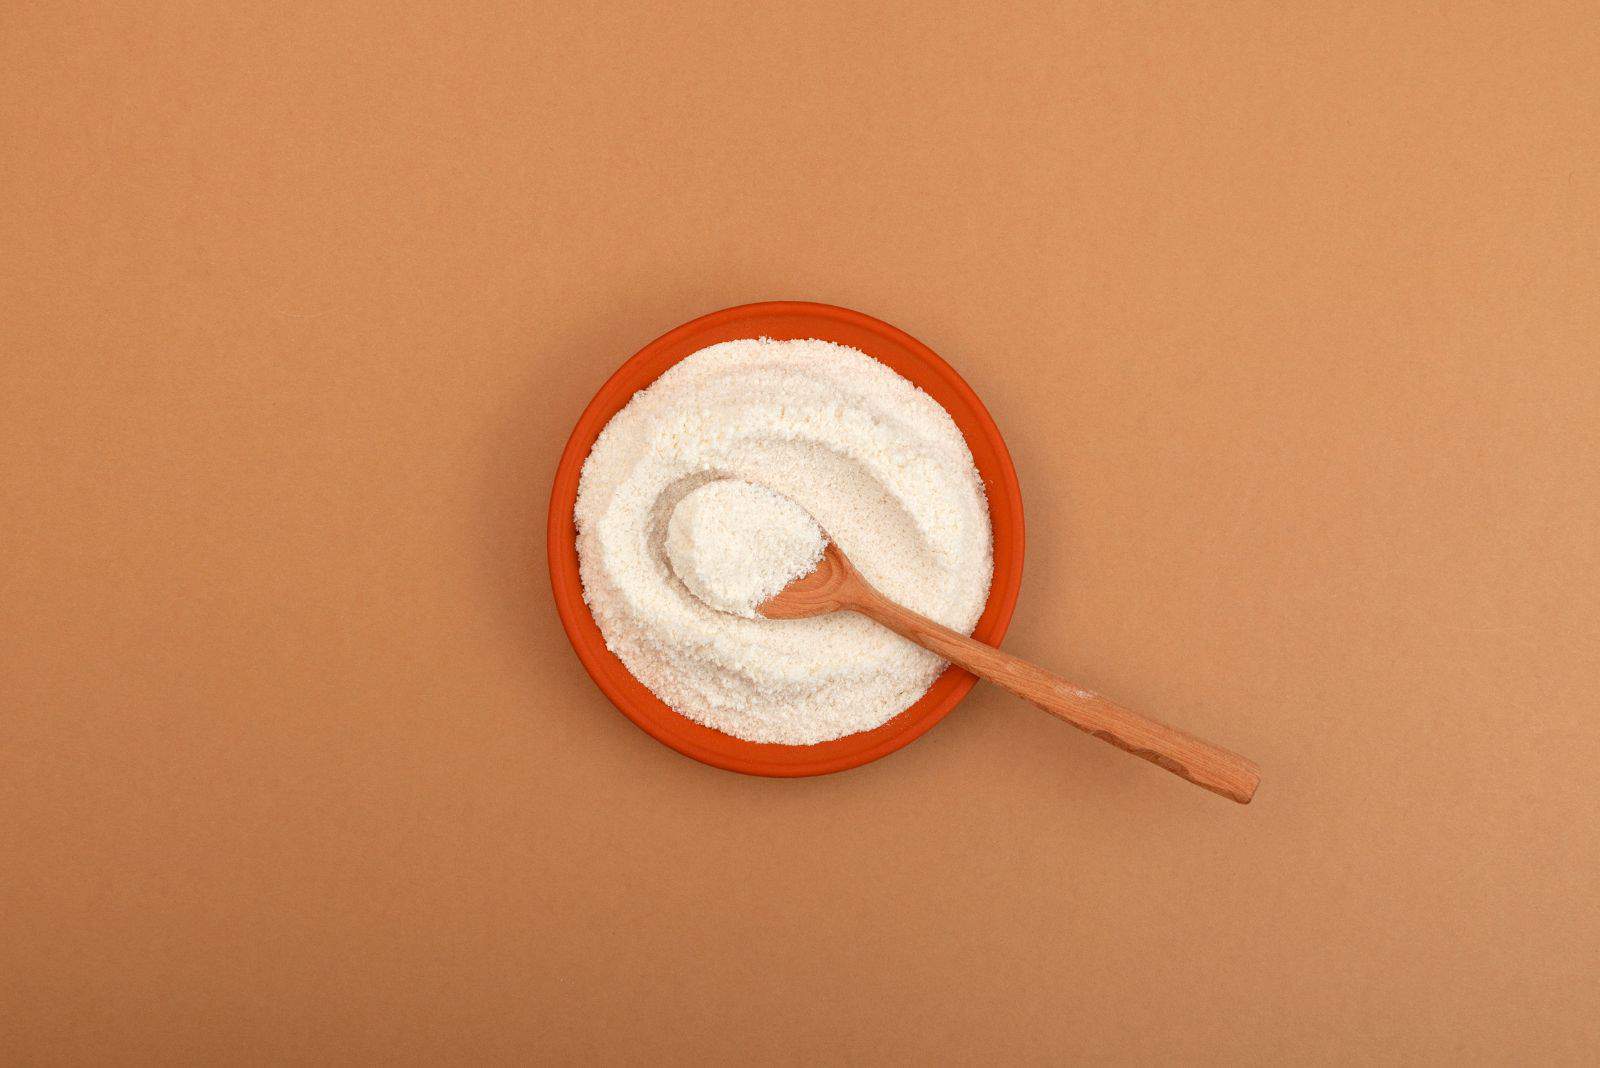 Carrageenan in a bowl on an orange background